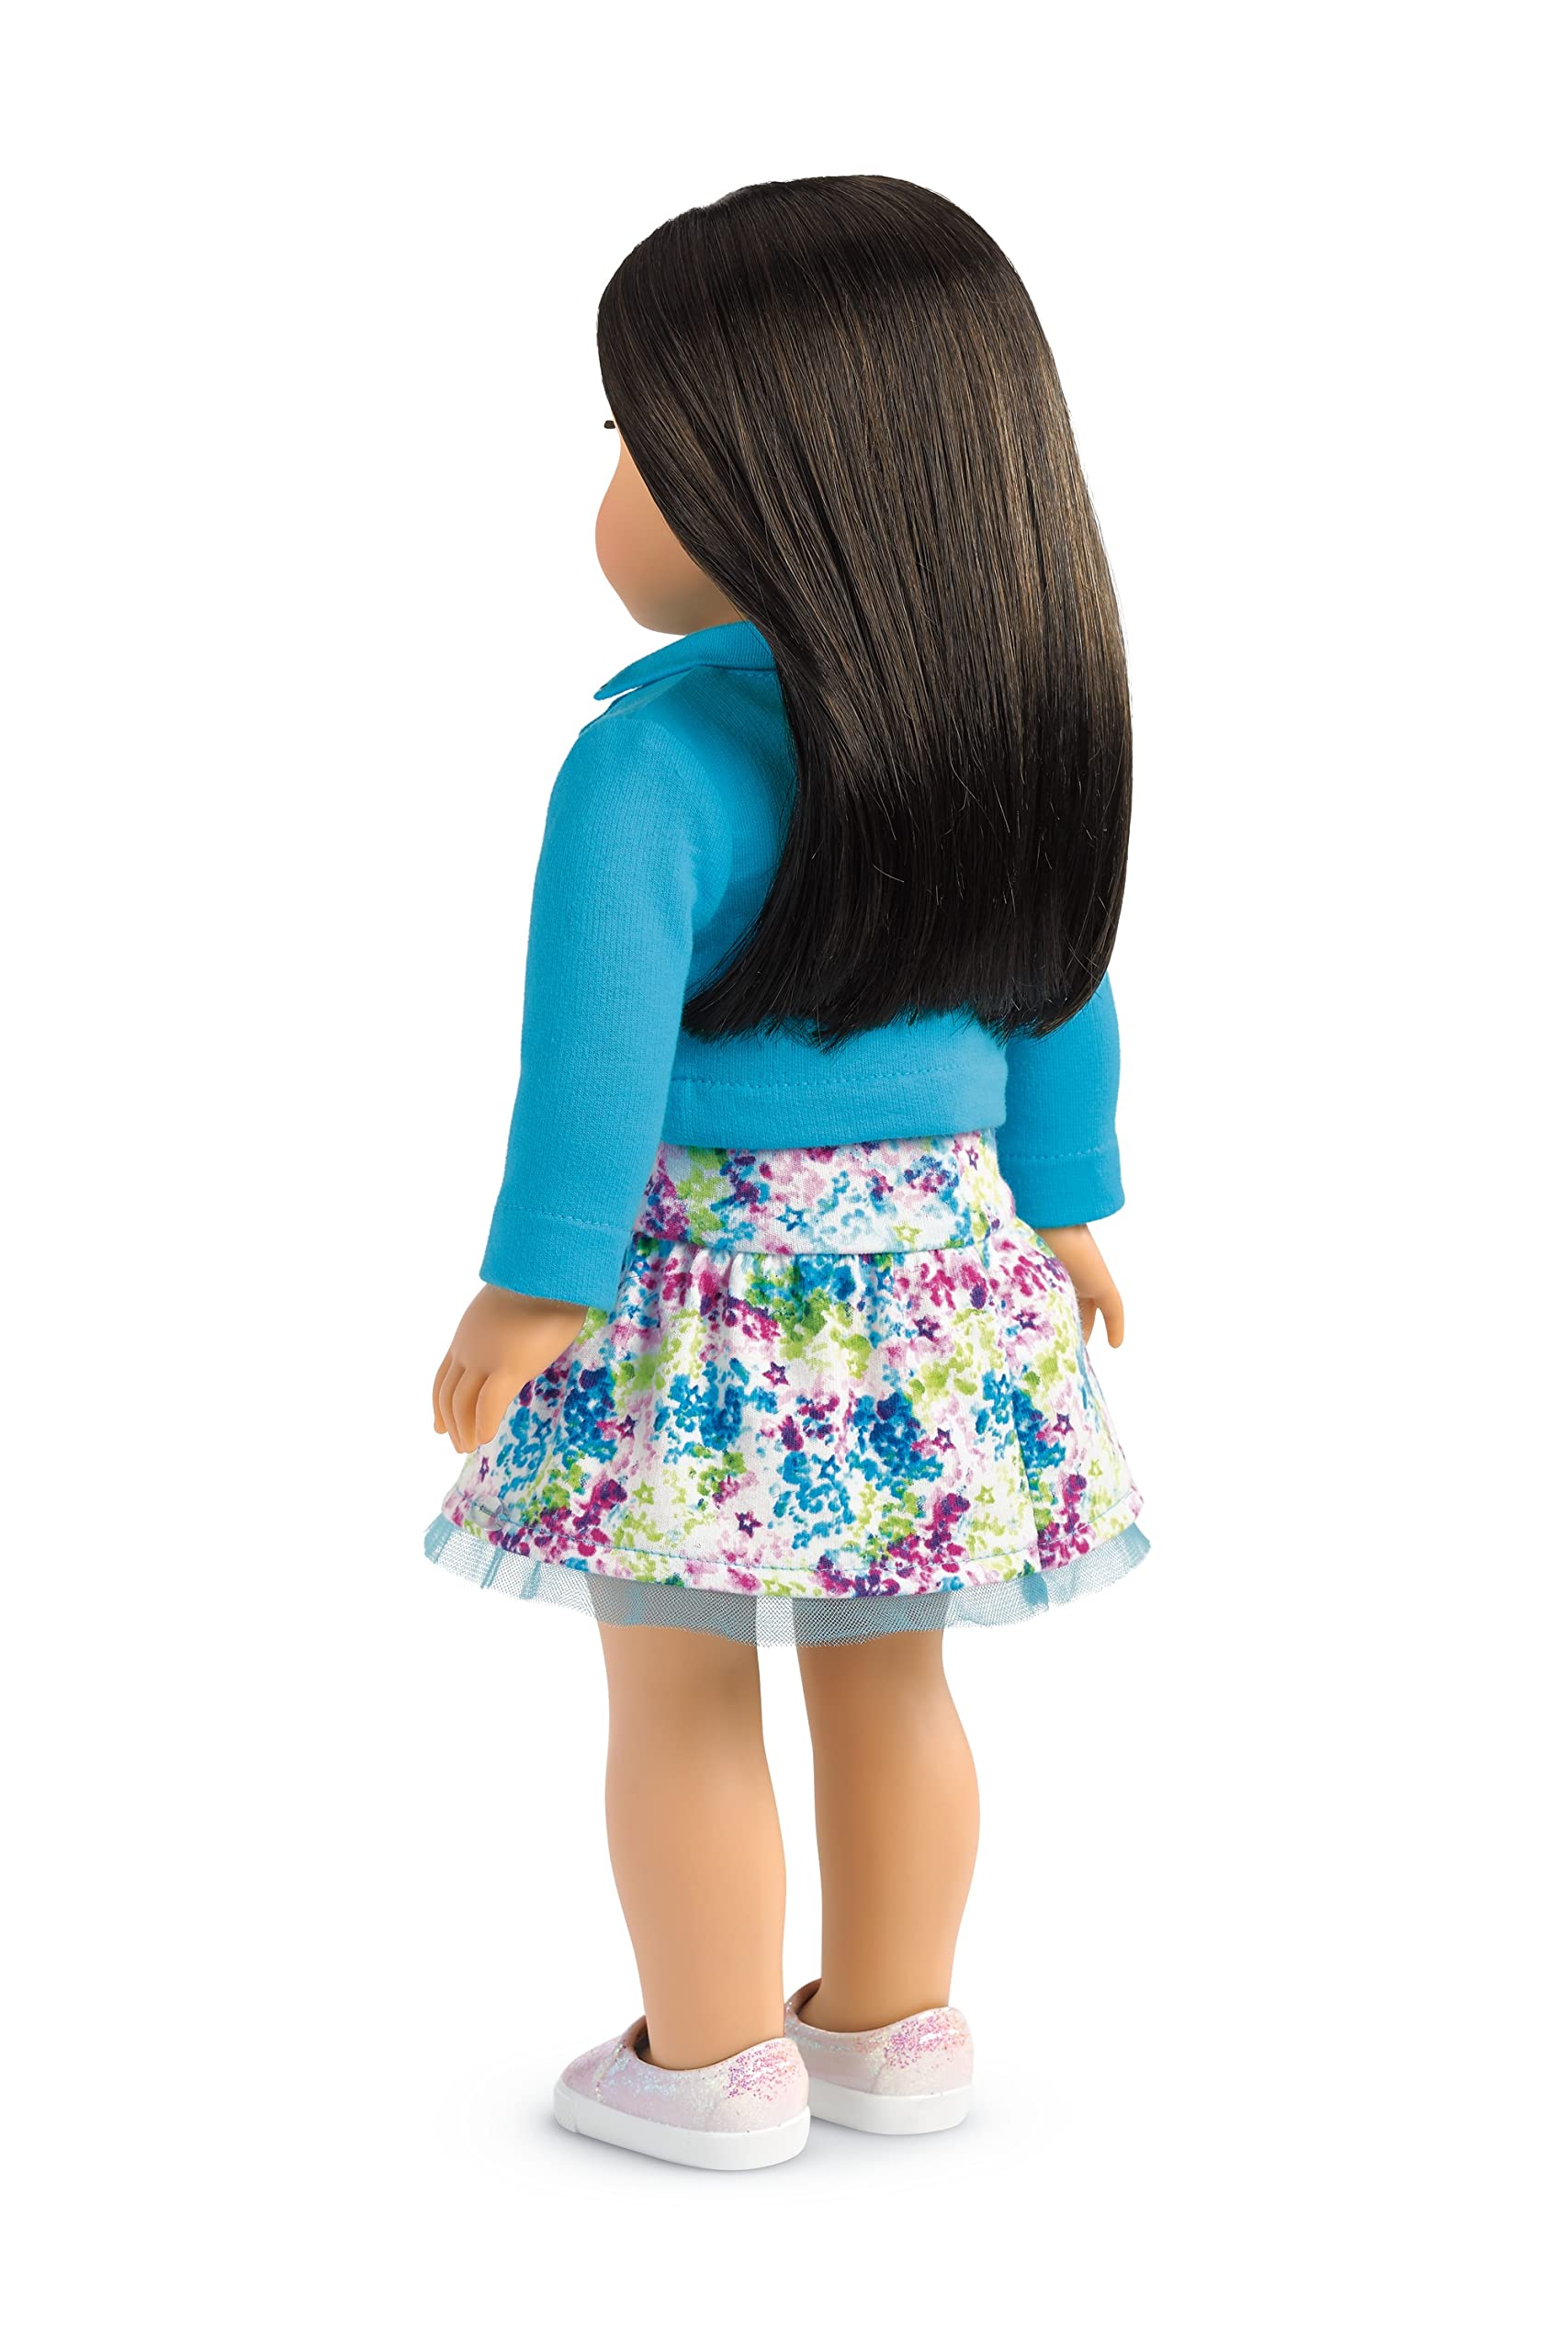 American Girl Truly Me Doll #64 with Brown Eyes, Black Hair, Light Skin Tone